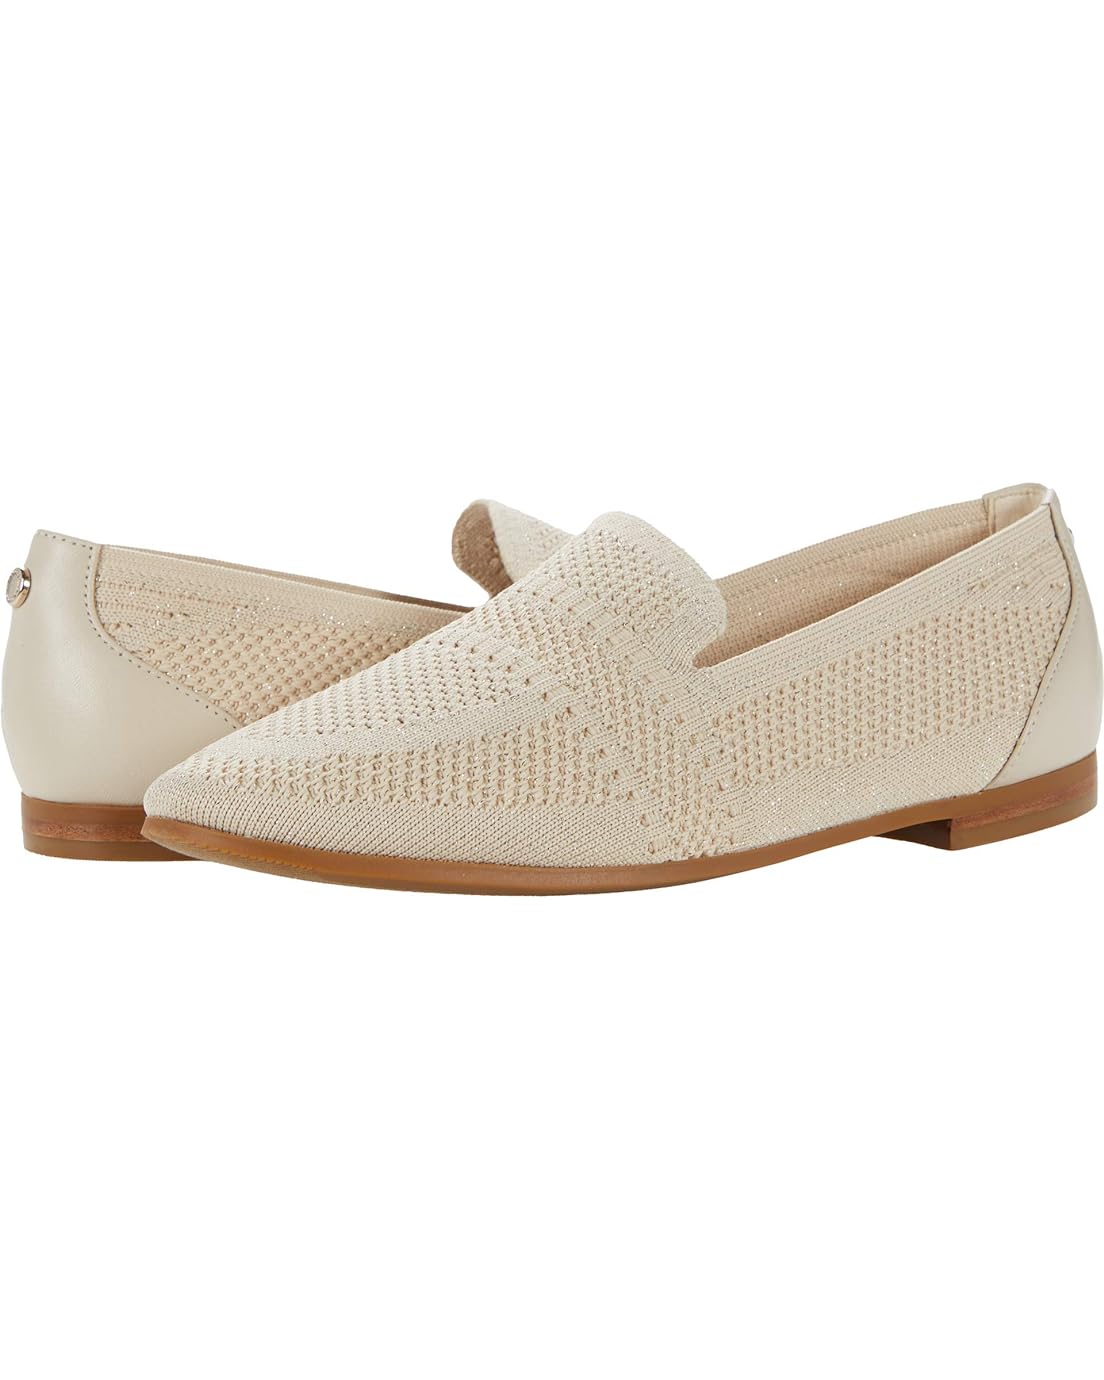 Cole Haan Modern Classics Knit Loafer